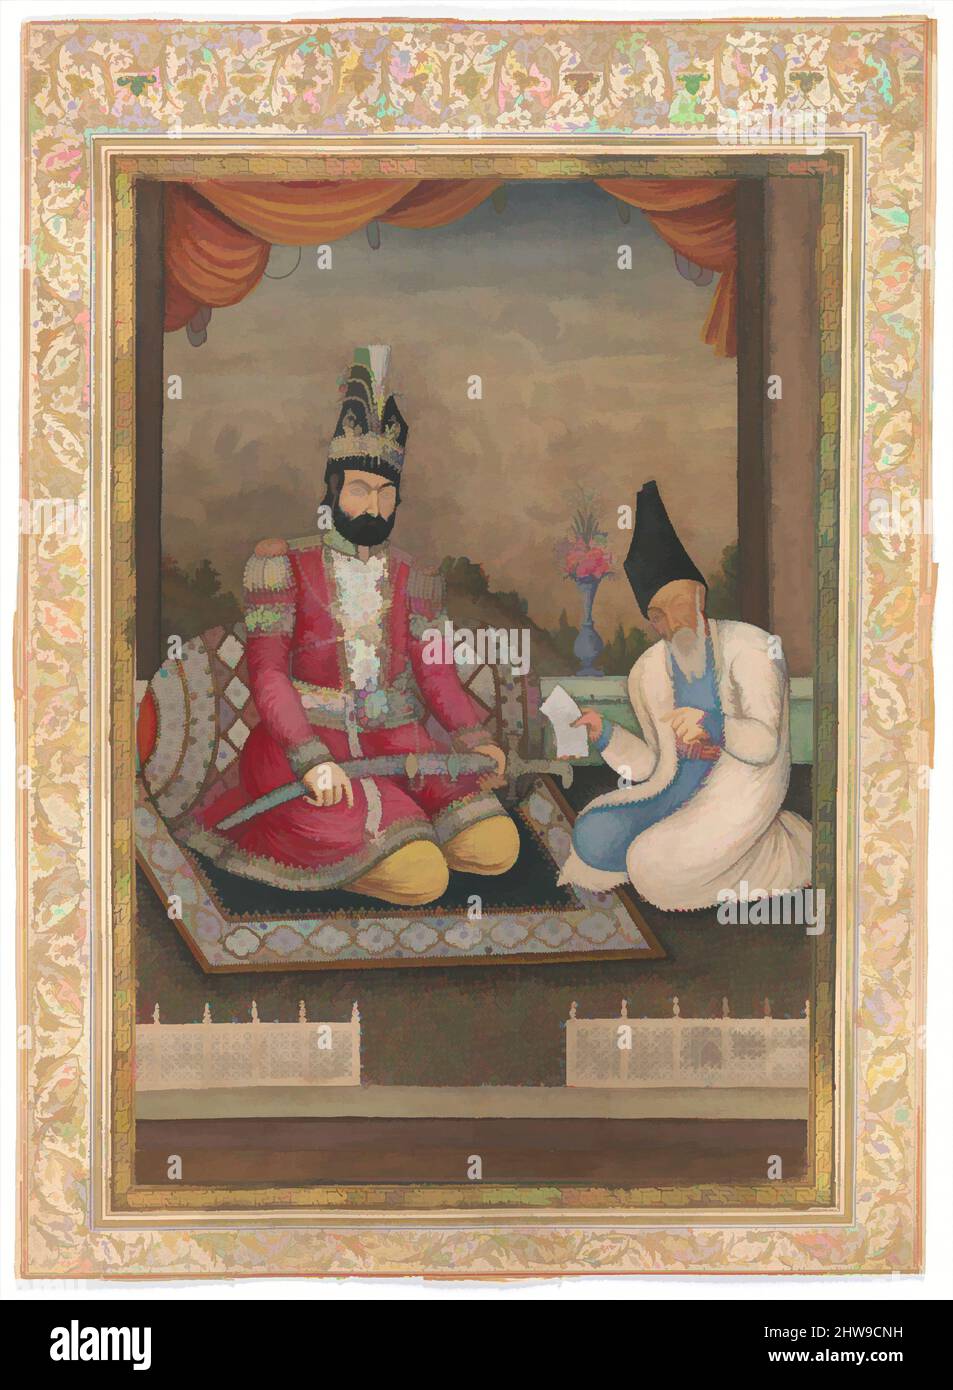 Art inspired by Portrait of Muhammad Shah Qajar and his Vizier Haj Mirza Aghasi, second quarter 19th century, Country of Origin Iran, Ink, opaque watercolor and gold on paper, H. 15 in (38.1 cm), Codices, This imperial portrait shows Muhammad Shah, the third ruler of the Qajar dynasty, Classic works modernized by Artotop with a splash of modernity. Shapes, color and value, eye-catching visual impact on art. Emotions through freedom of artworks in a contemporary way. A timeless message pursuing a wildly creative new direction. Artists turning to the digital medium and creating the Artotop NFT Stock Photo